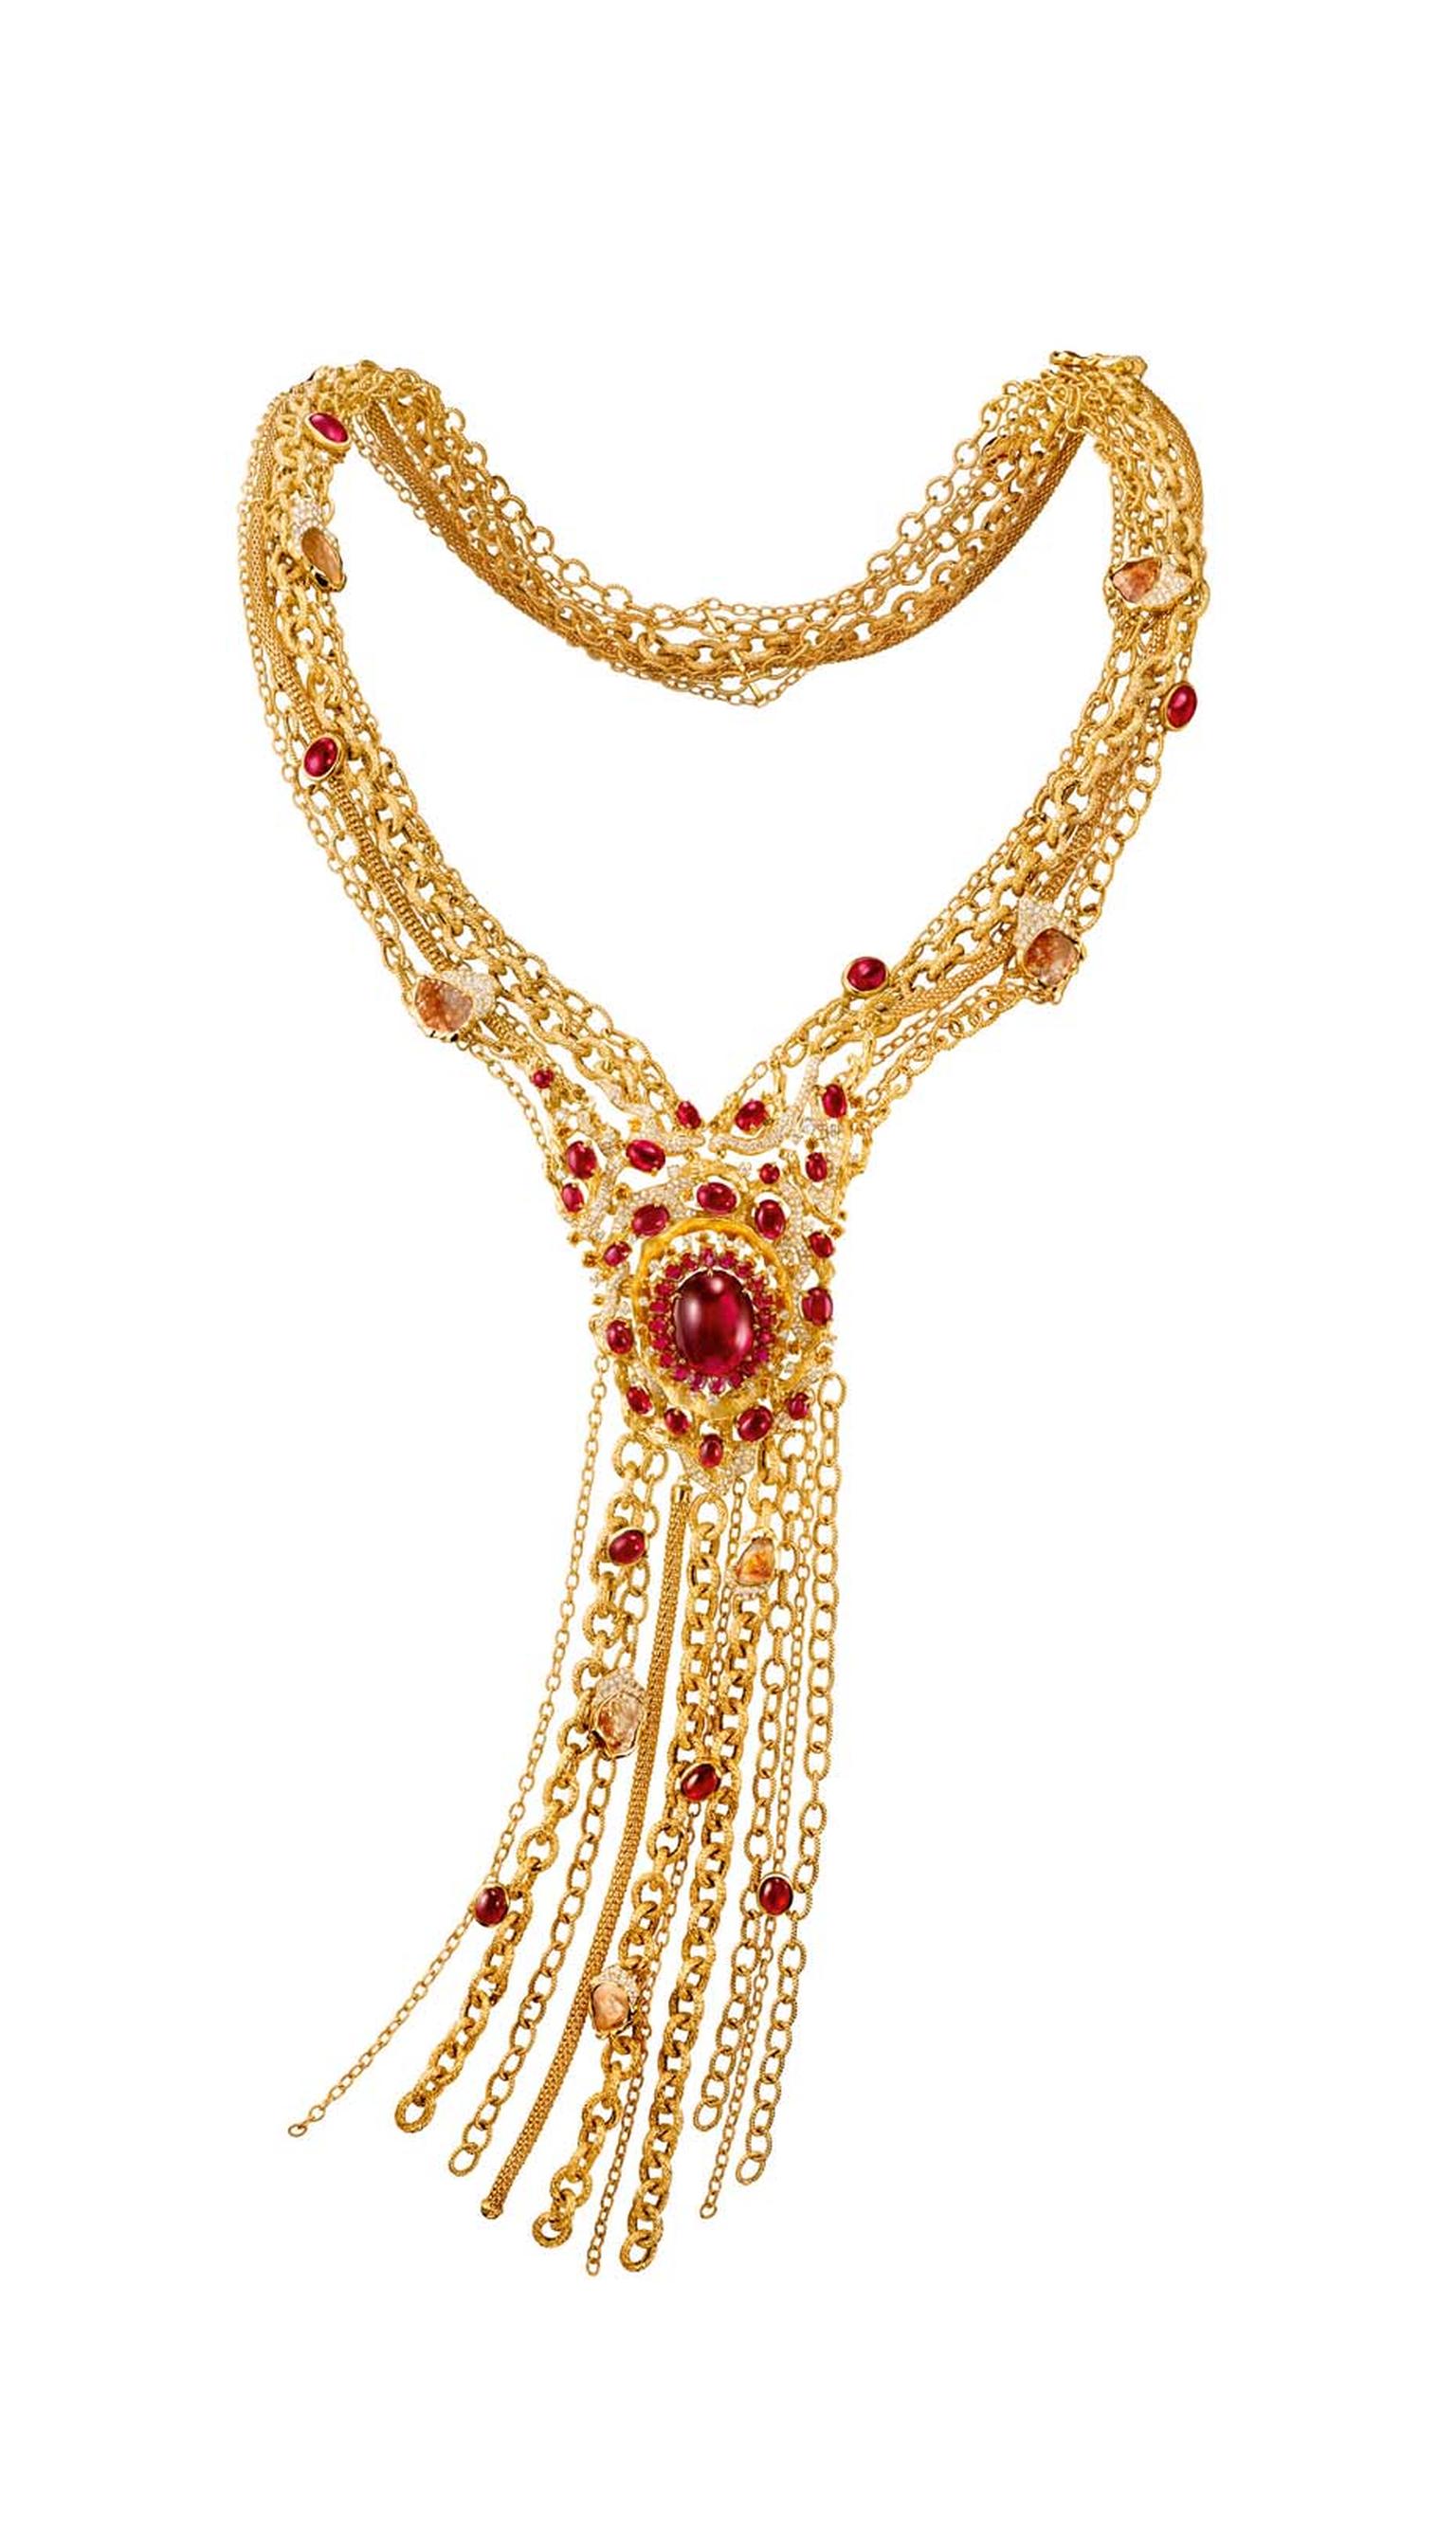 Chow Tai Fook's gold Chant necklace from the Reflections of Siem high jewellery collection, set with a 27.65-carat oval red tourmaline cabochon set in yellow gold, with tassels mimicking the roots of a banyan tree, diamond-studded branches and tourmaline 